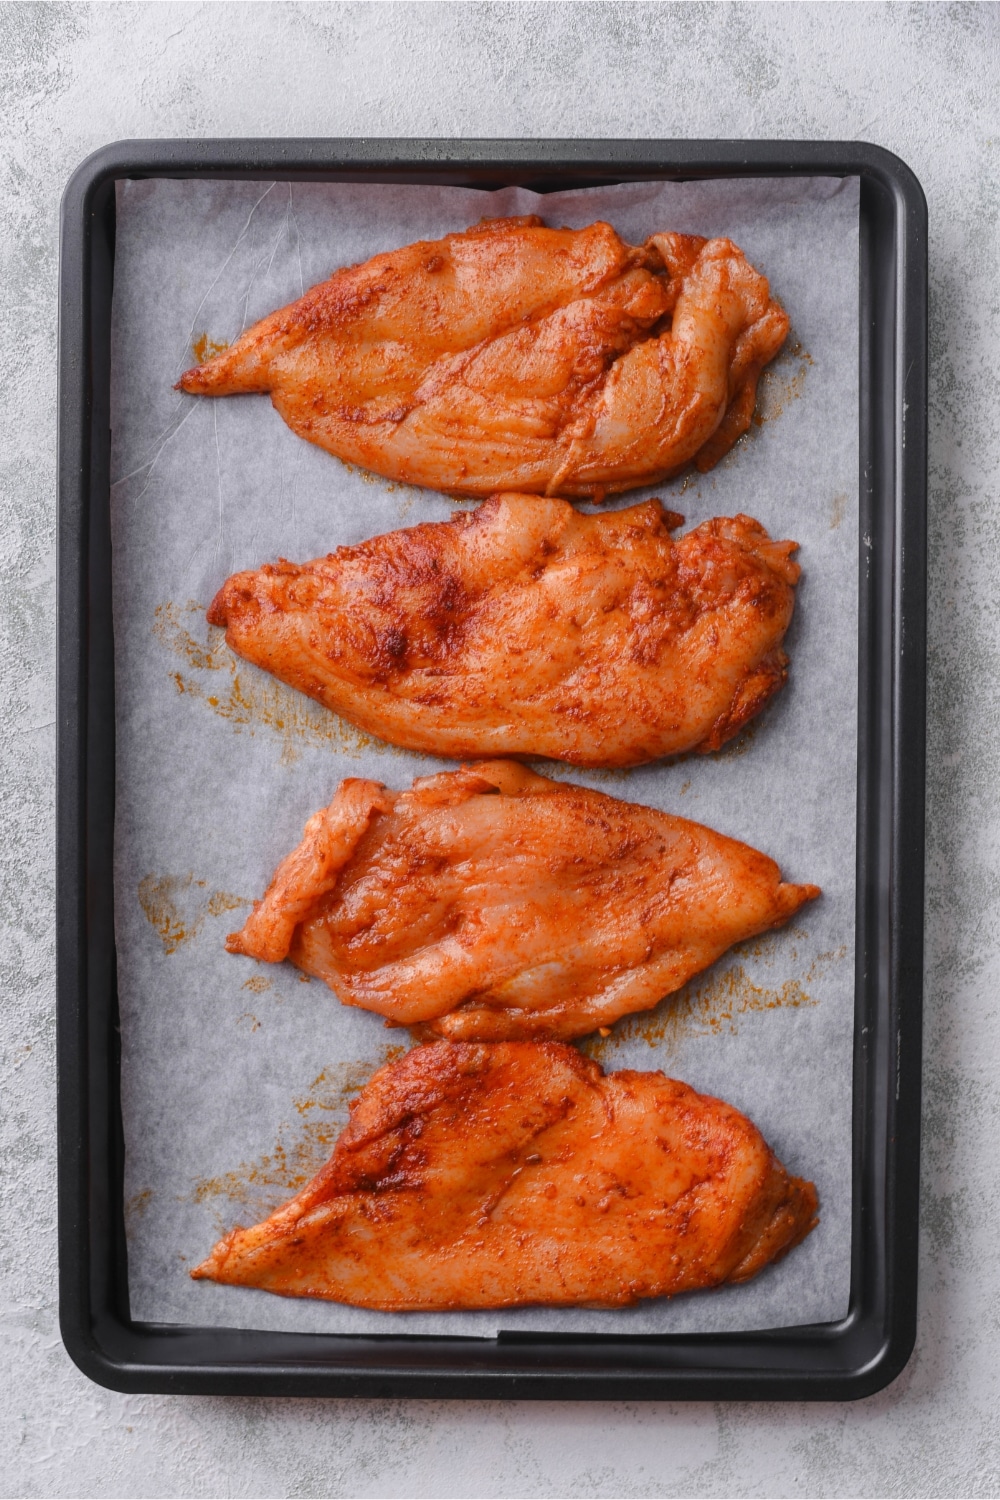 Seasoned and flattened thin chicken breasts on a parchment paper lined baking sheet.